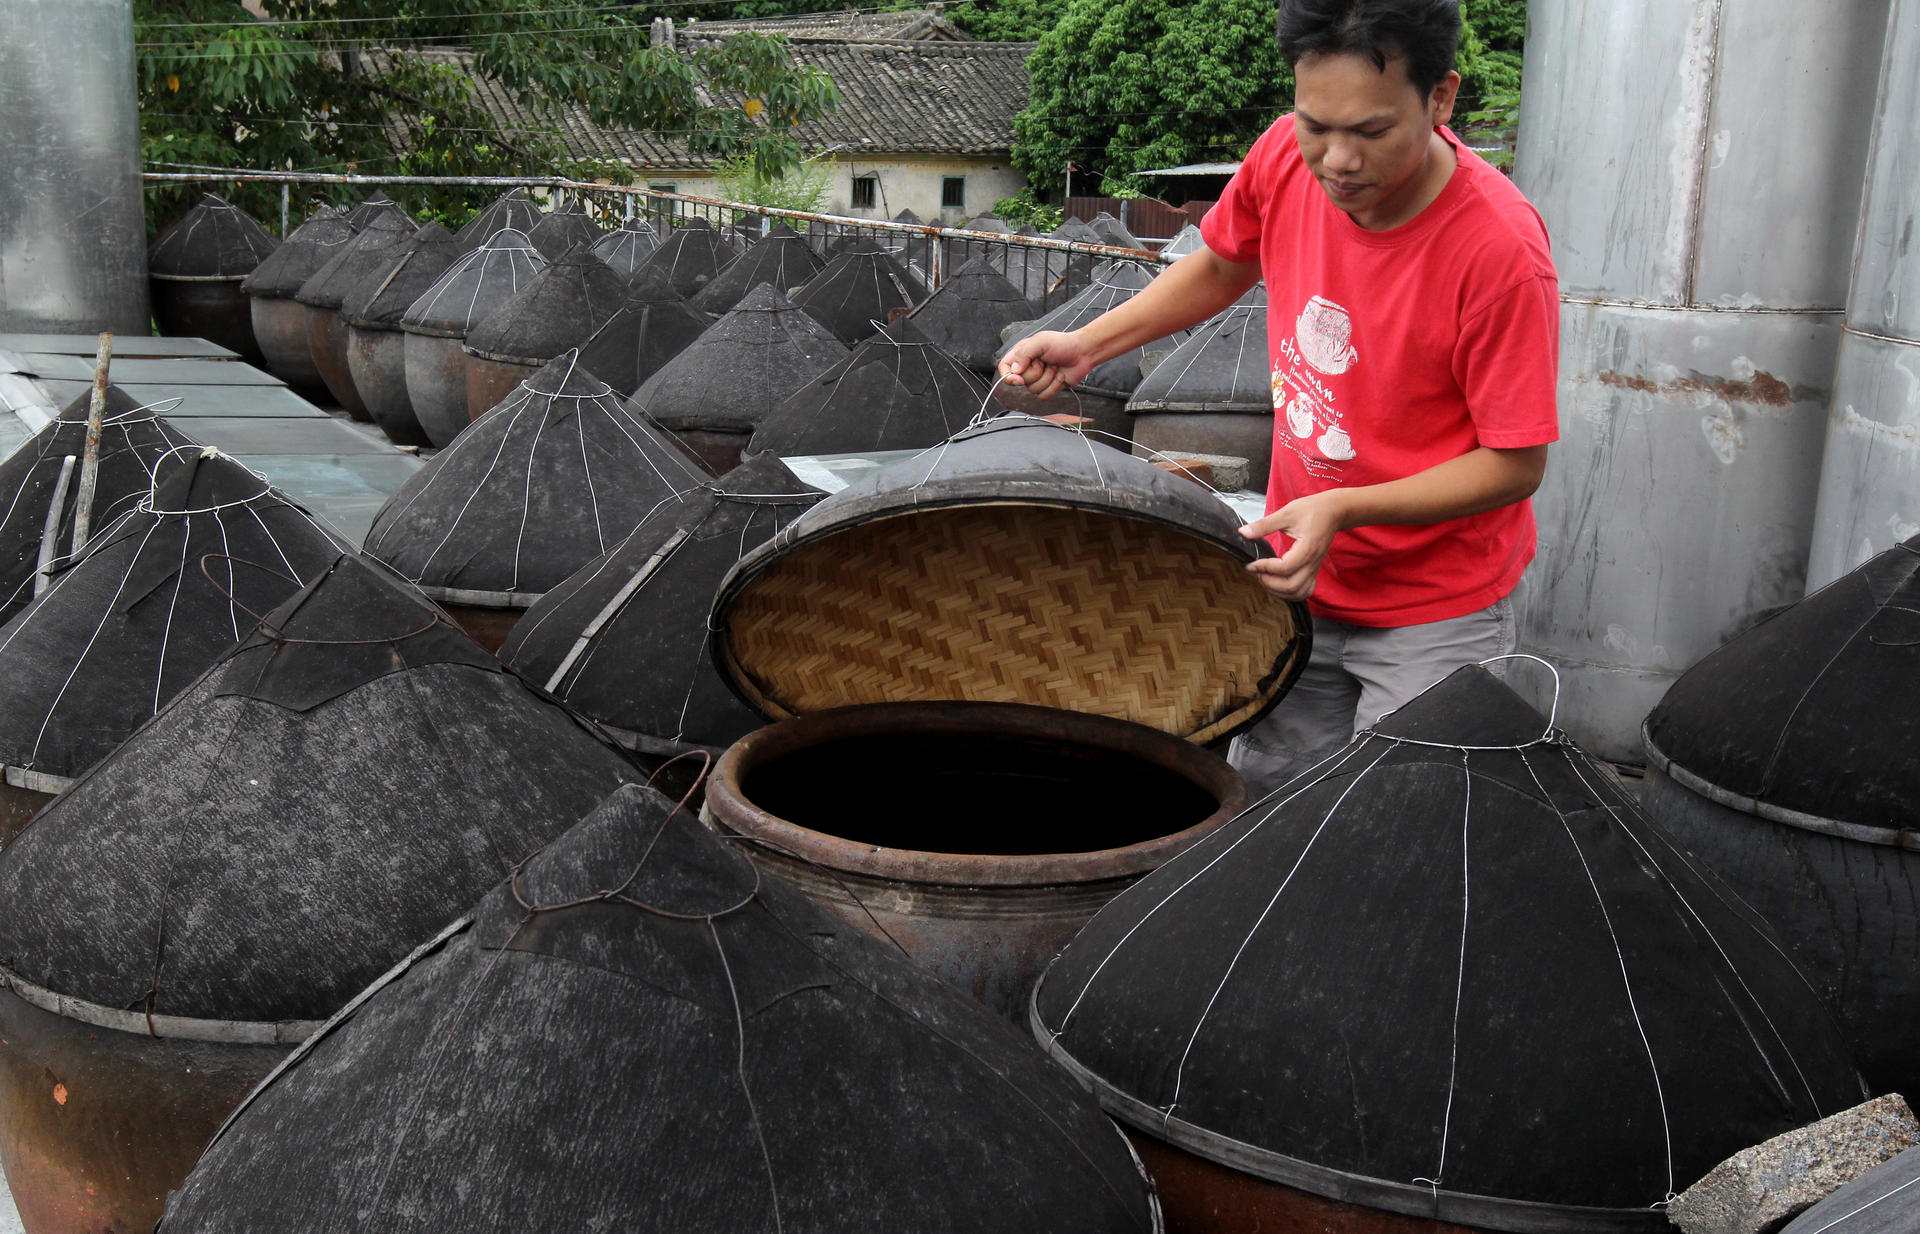  A worker checks vats at one of Kwu Tung's soy sauce factories. Photo: K.Y. Cheng